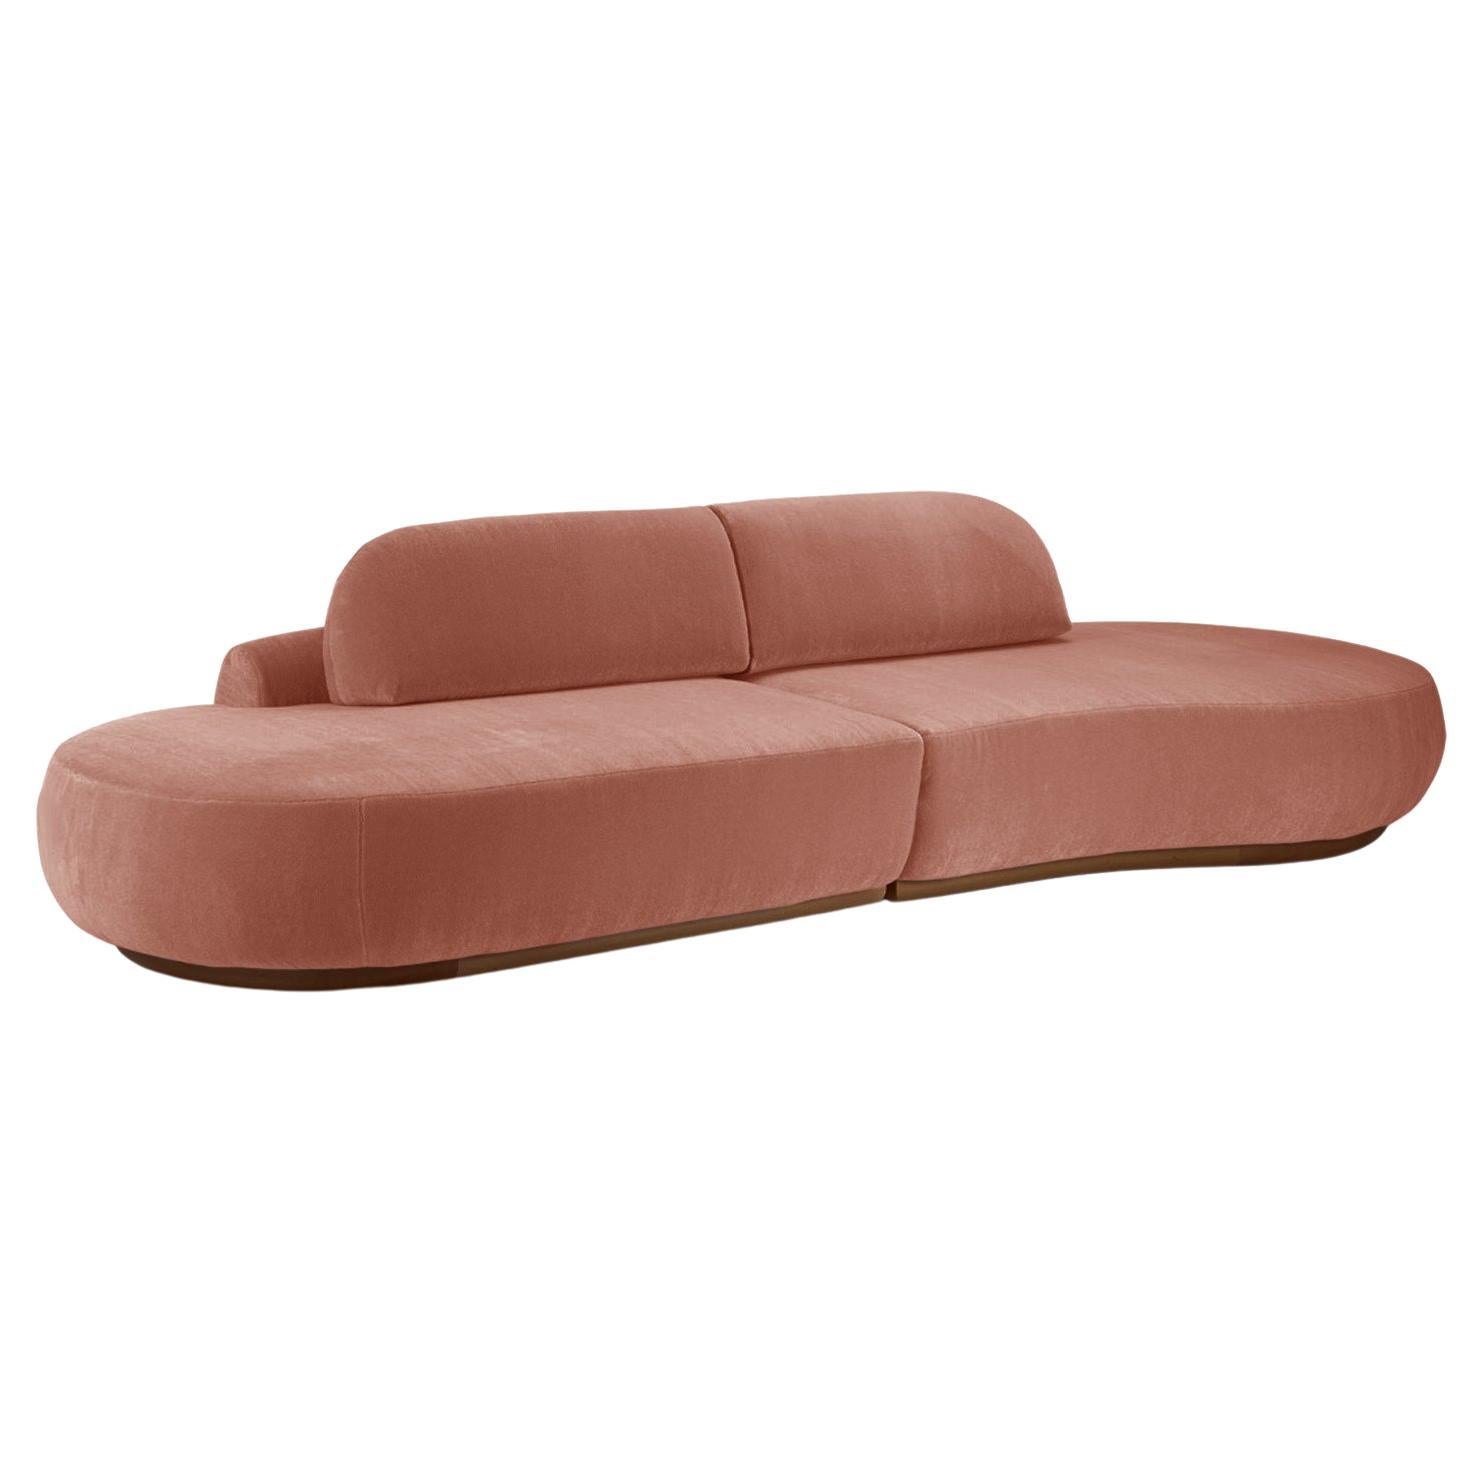 Naked Curved Sectional Sofa, 2 Piece with Beech Ash-056-1 and Paris Brick For Sale